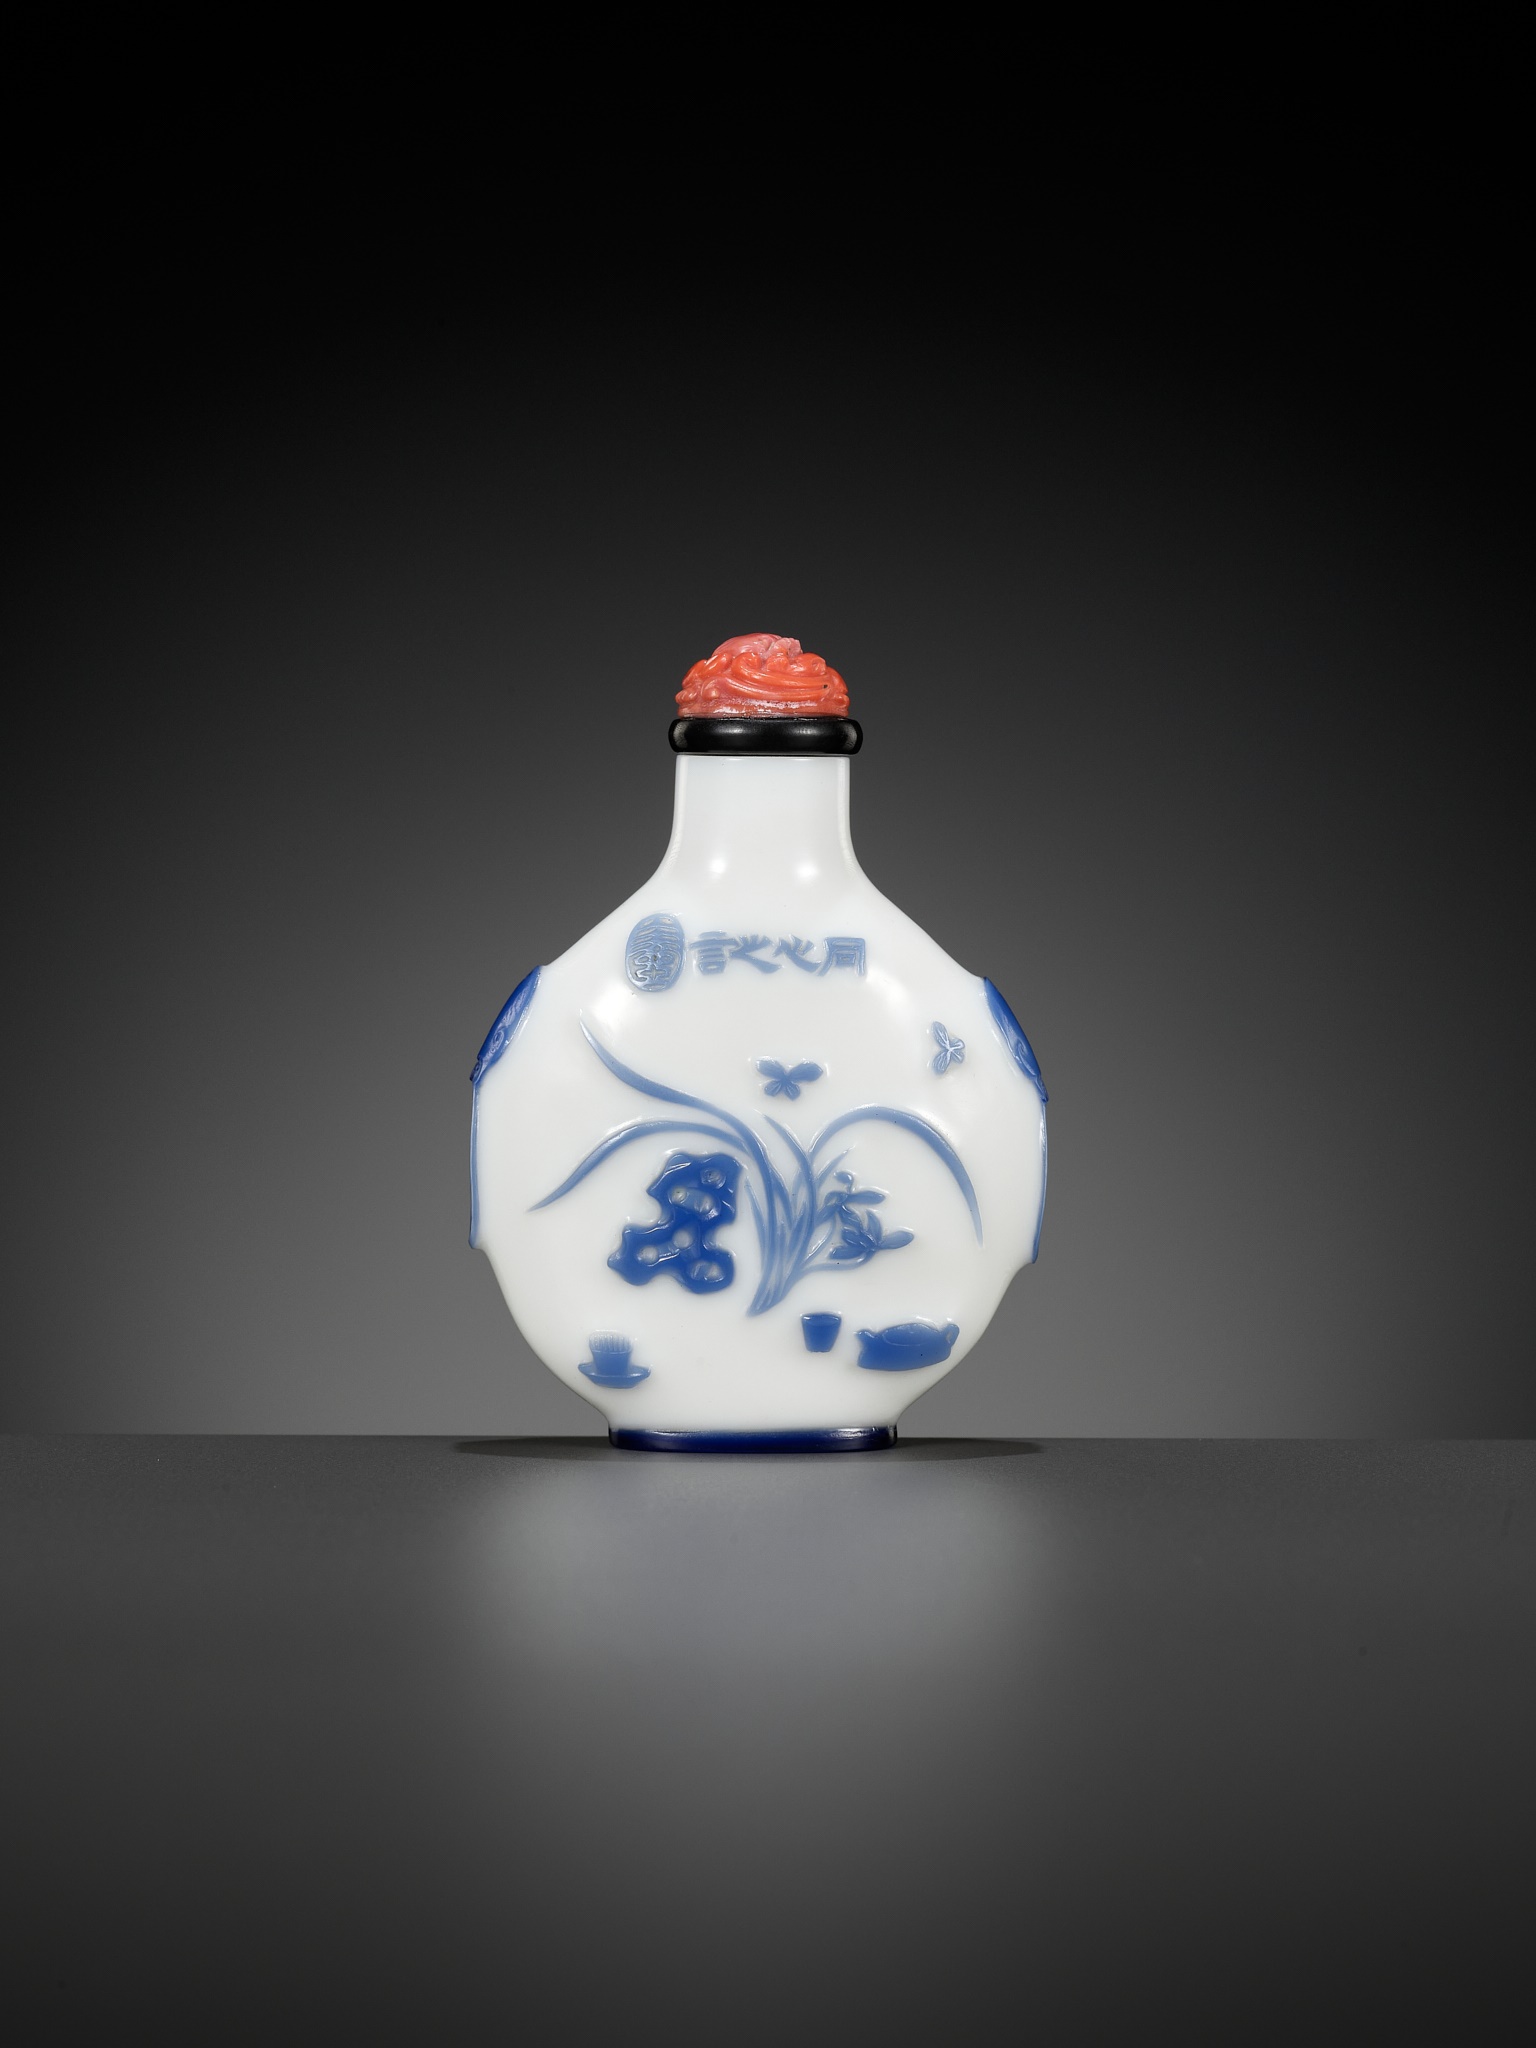 AN INSCRIBED SAPPHIRE-BLUE OVERLAY GLASS SNUFF BOTTLE, YANGZHOU SCHOOL, CHINA, 1800-1880 - Image 2 of 20